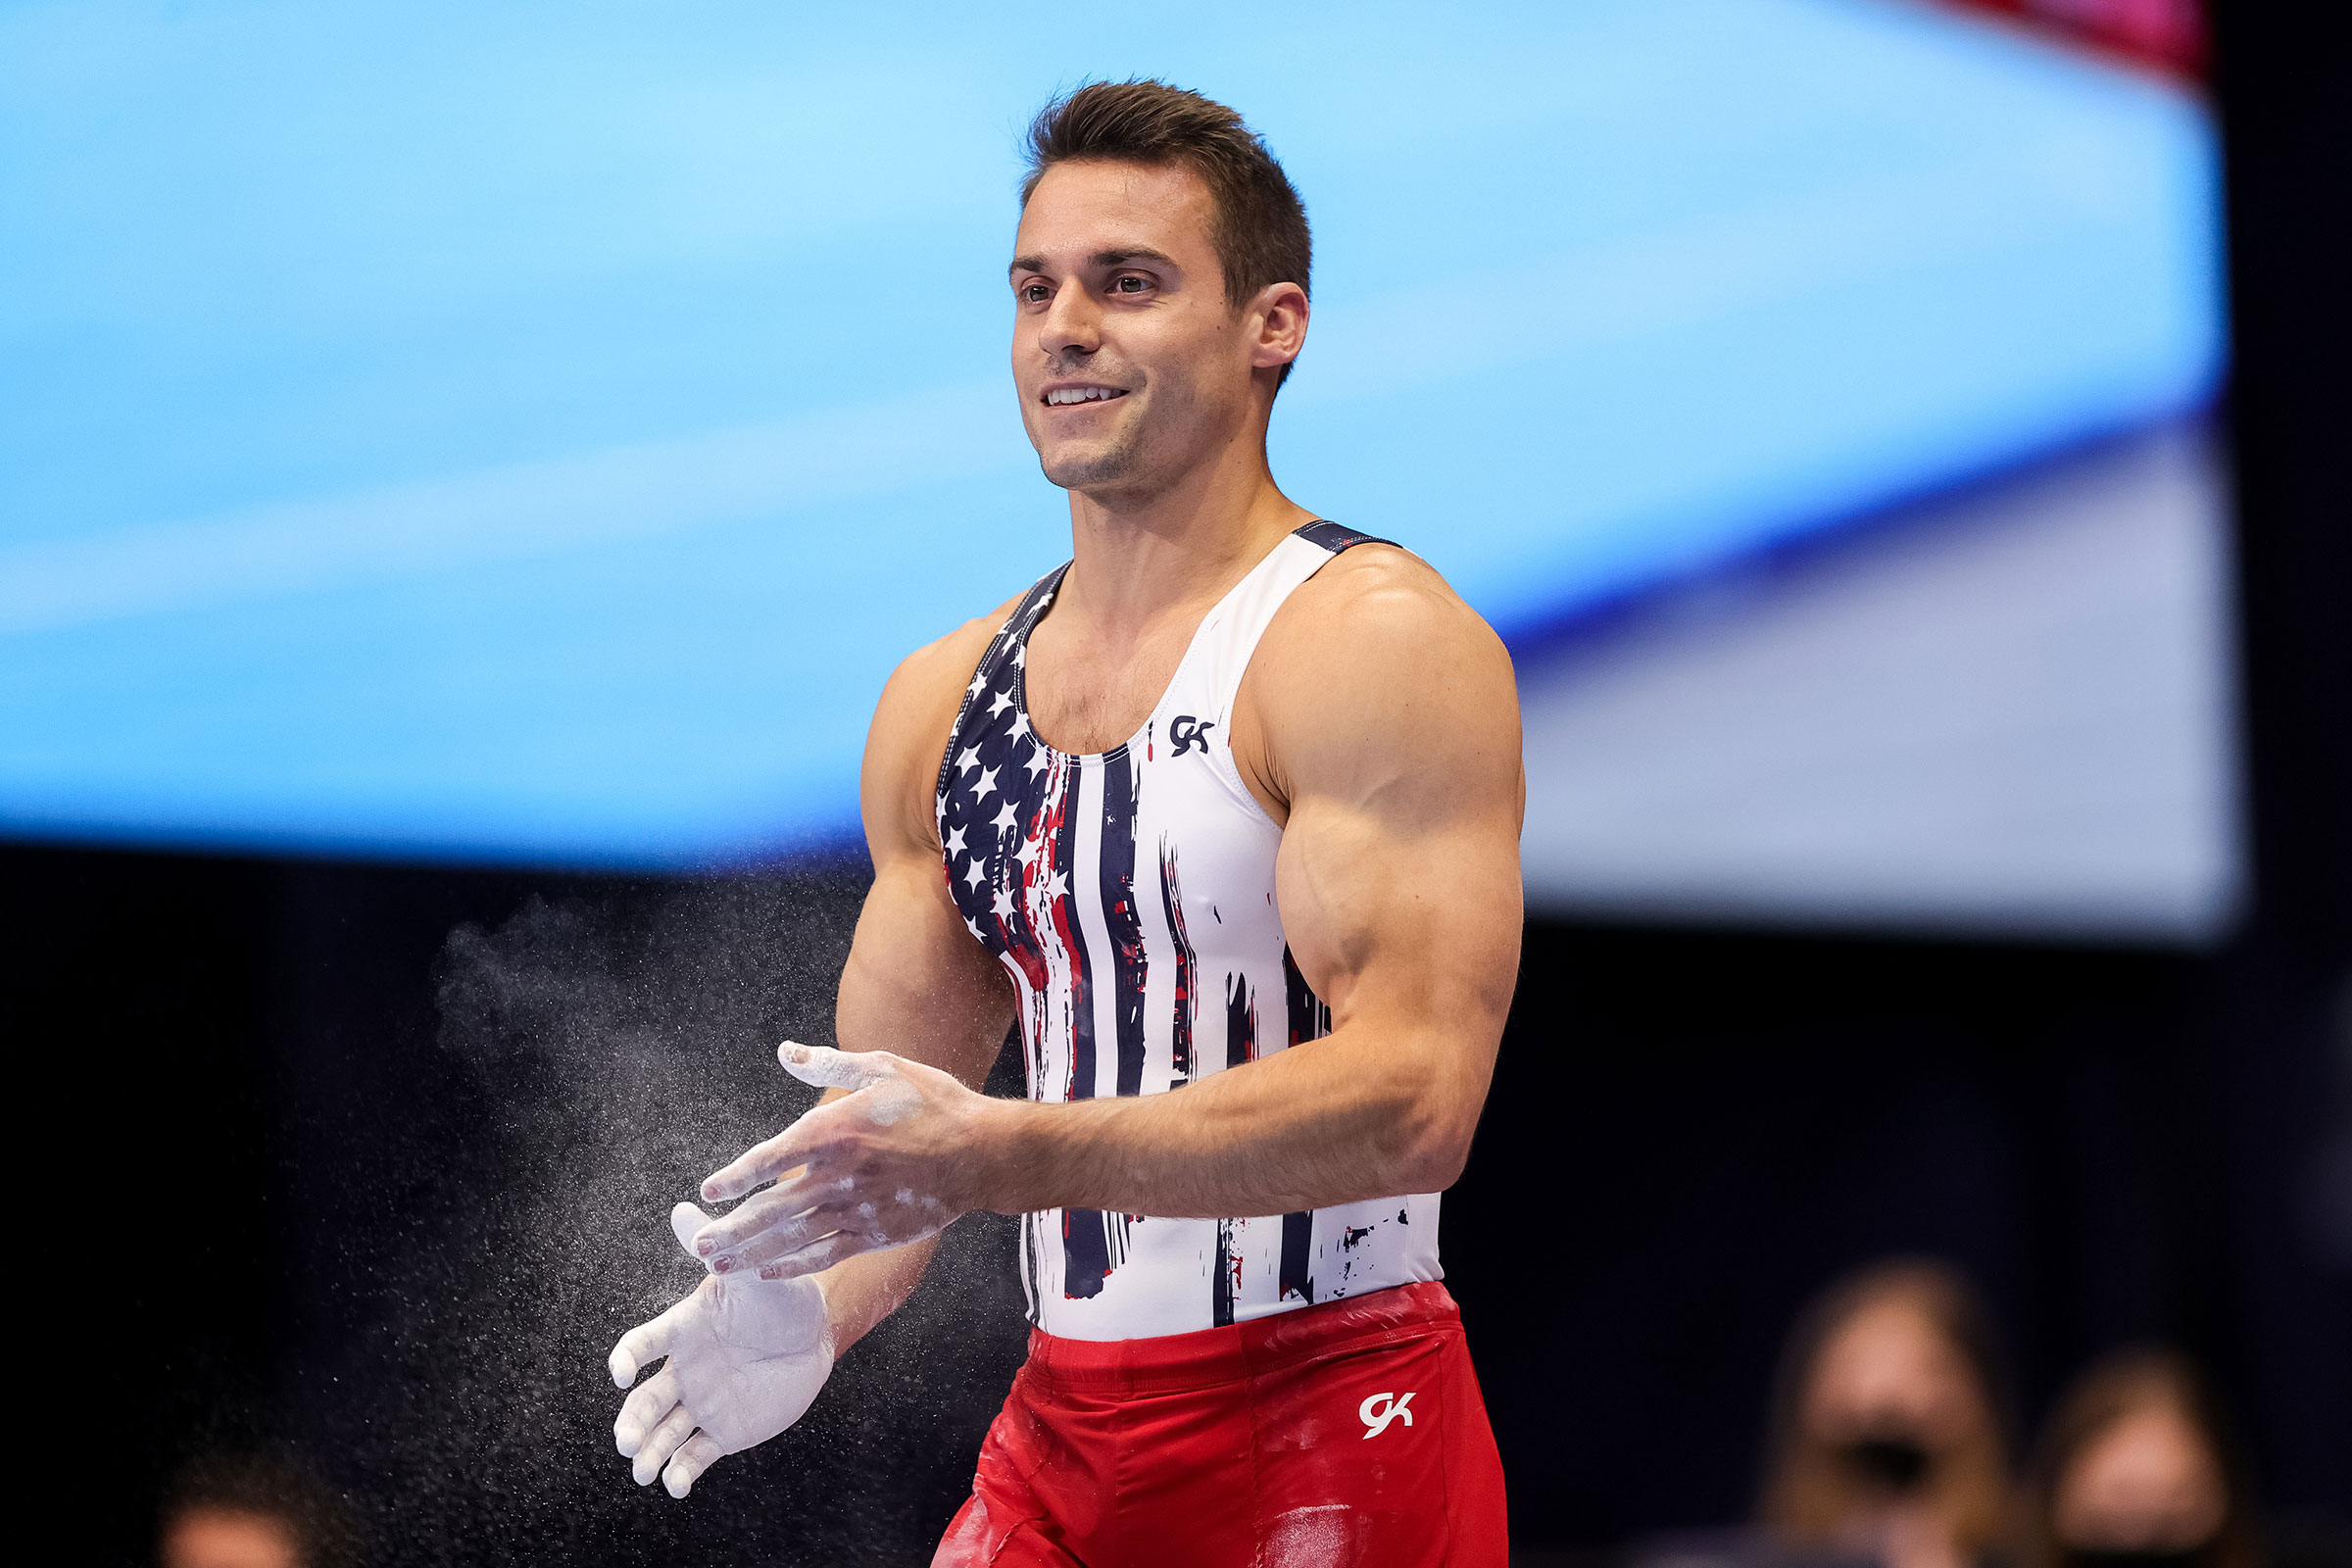 Sam Mikulak prepares to compete on the parallel bars during day one of the Men's 2021 U.S. Olympic Trials in St Louis on June 24, 2021. (Carmen Mandato—Getty Images)